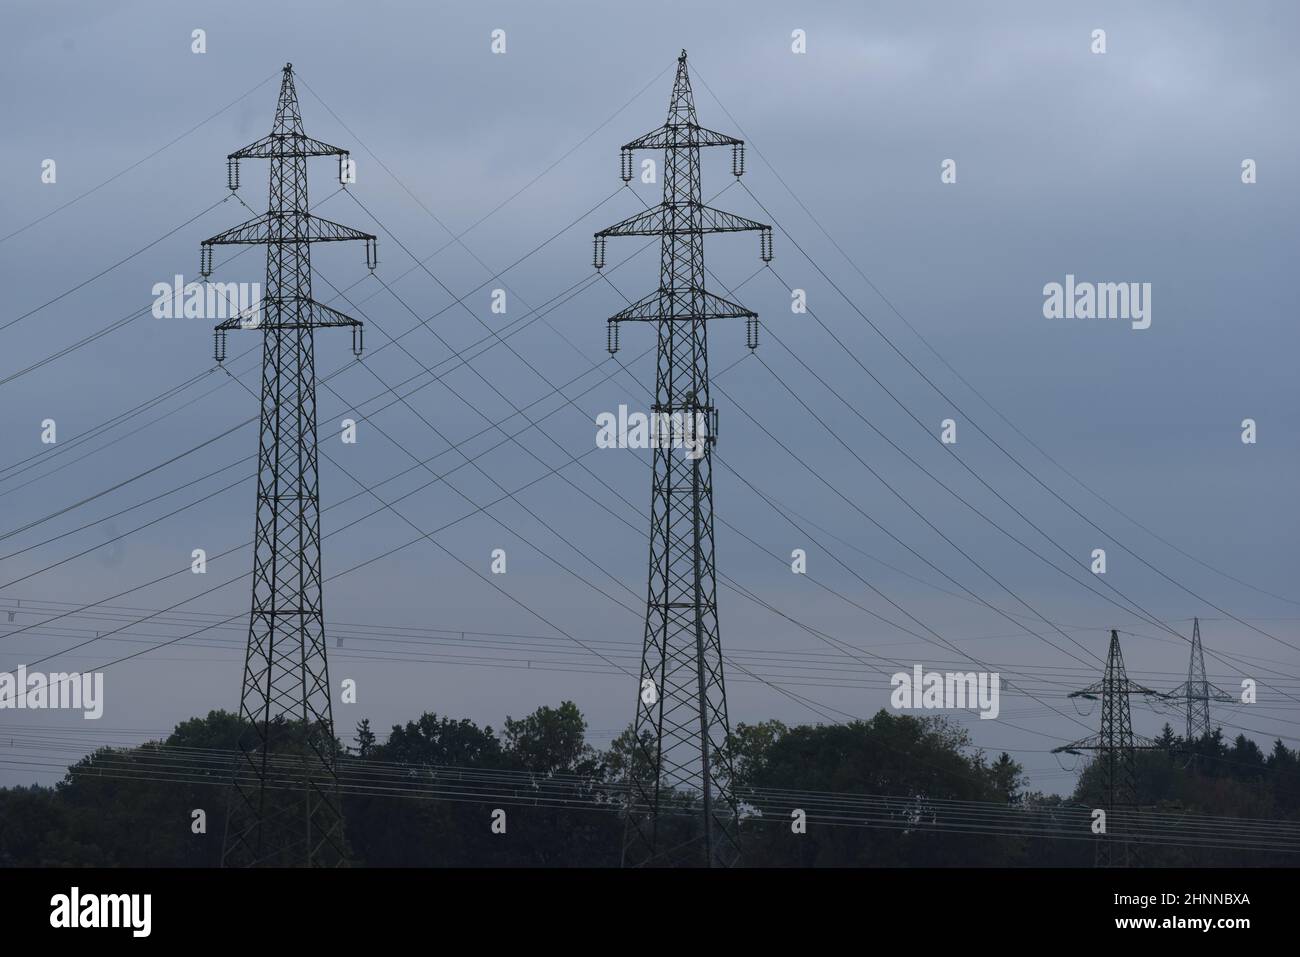 energy supply with a 380 kv power line and power pole Stock Photo